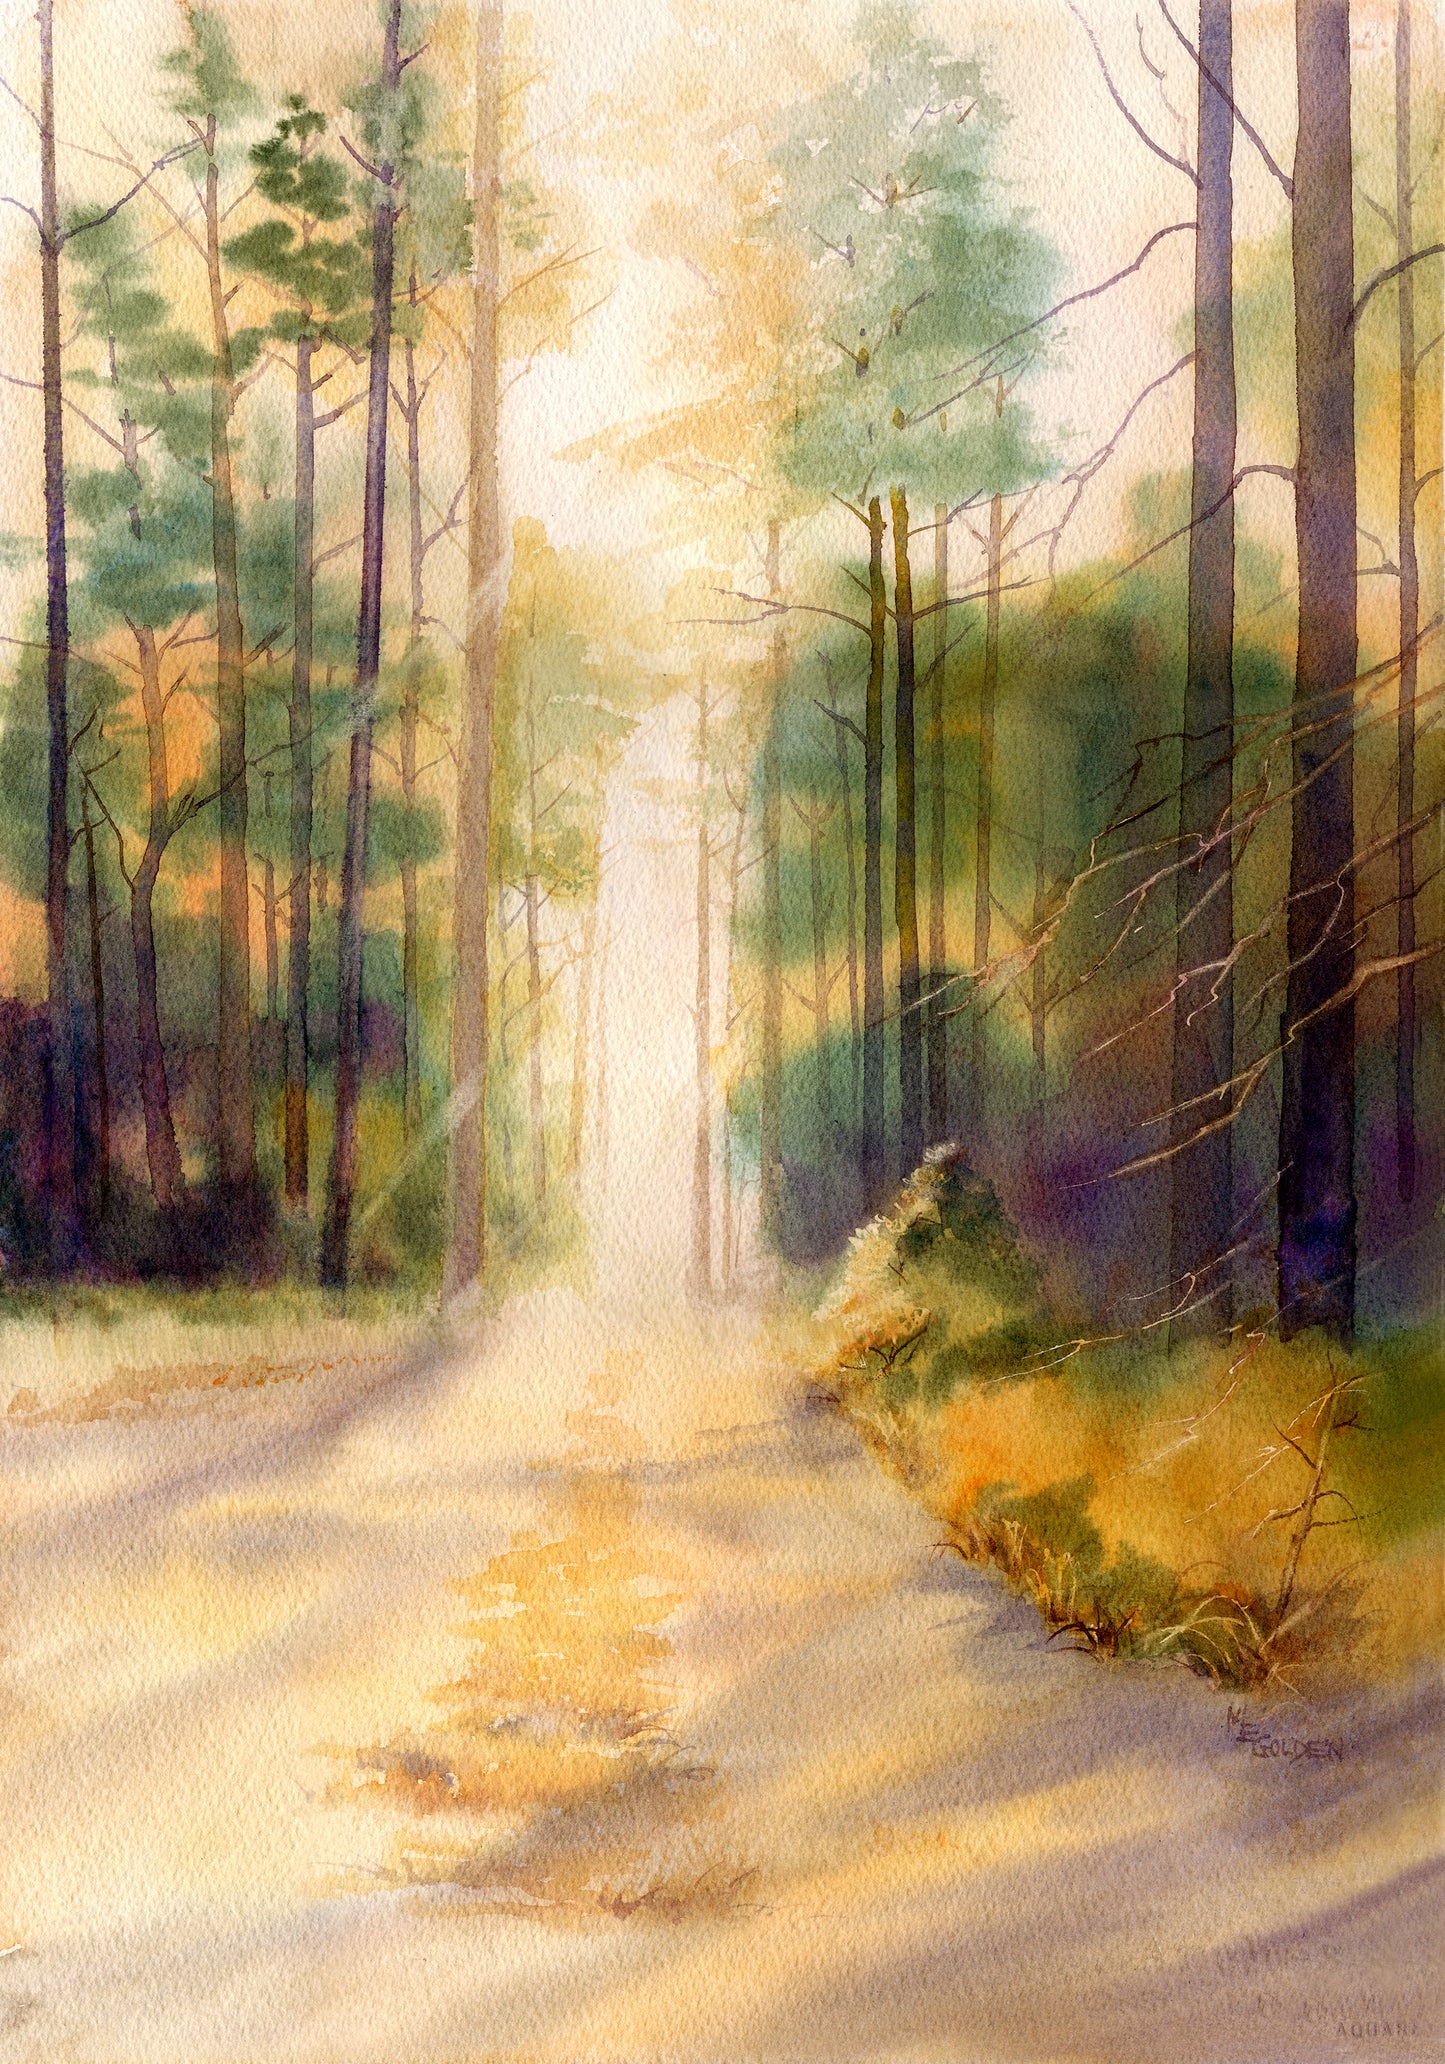 My Fathers Trees and road through the forest Giclée Print